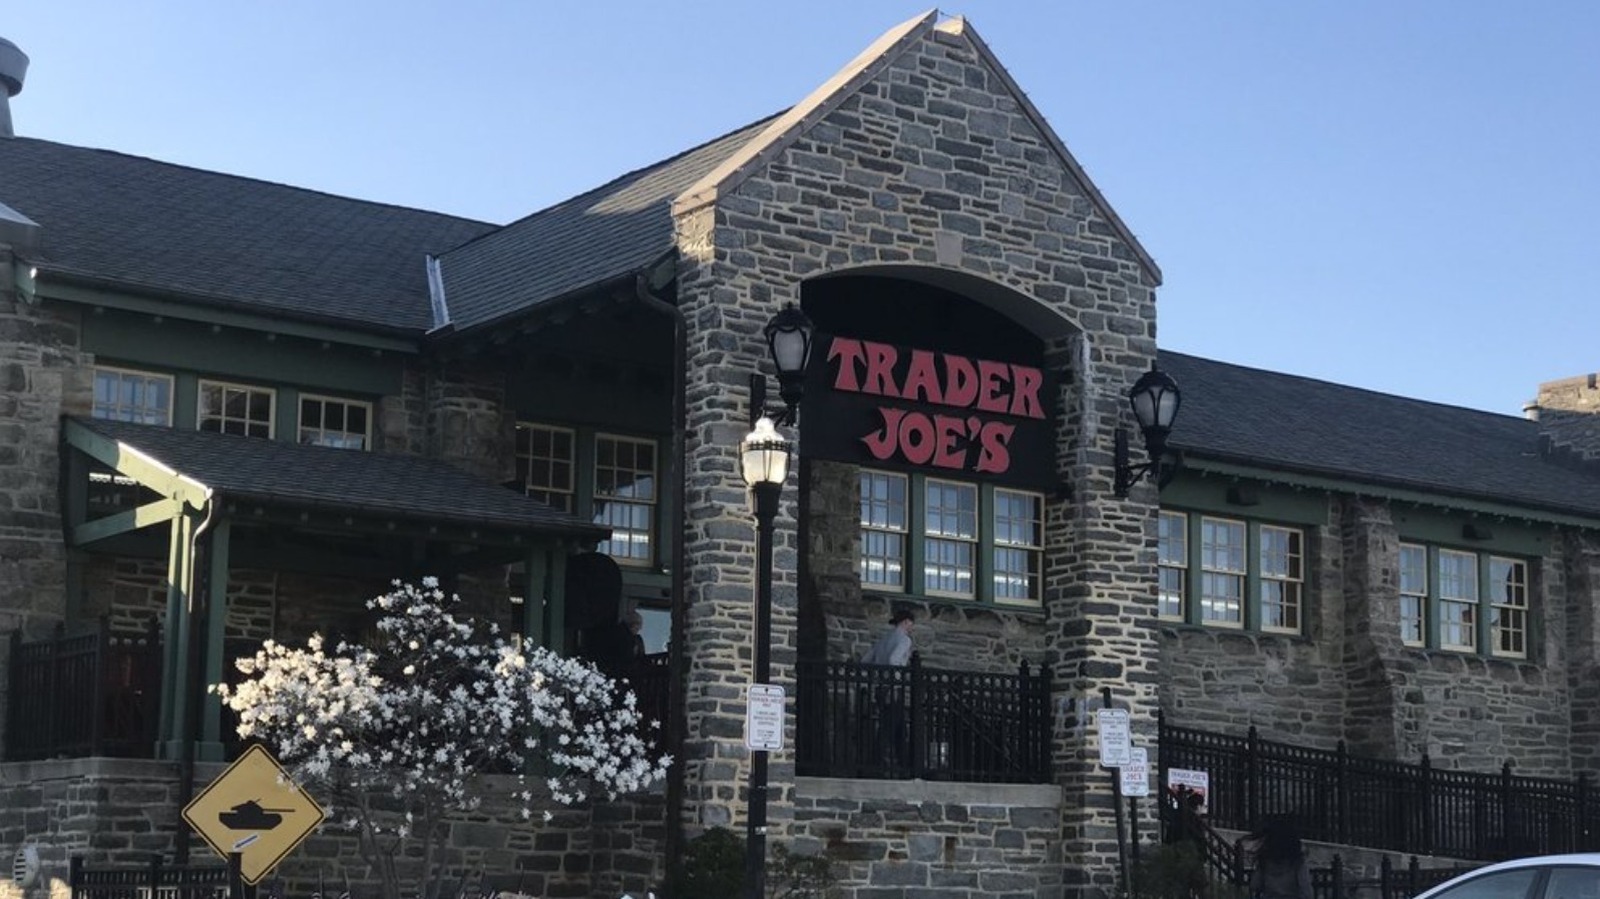 This Trader Joe's Shares Space With A Veterans' Museum